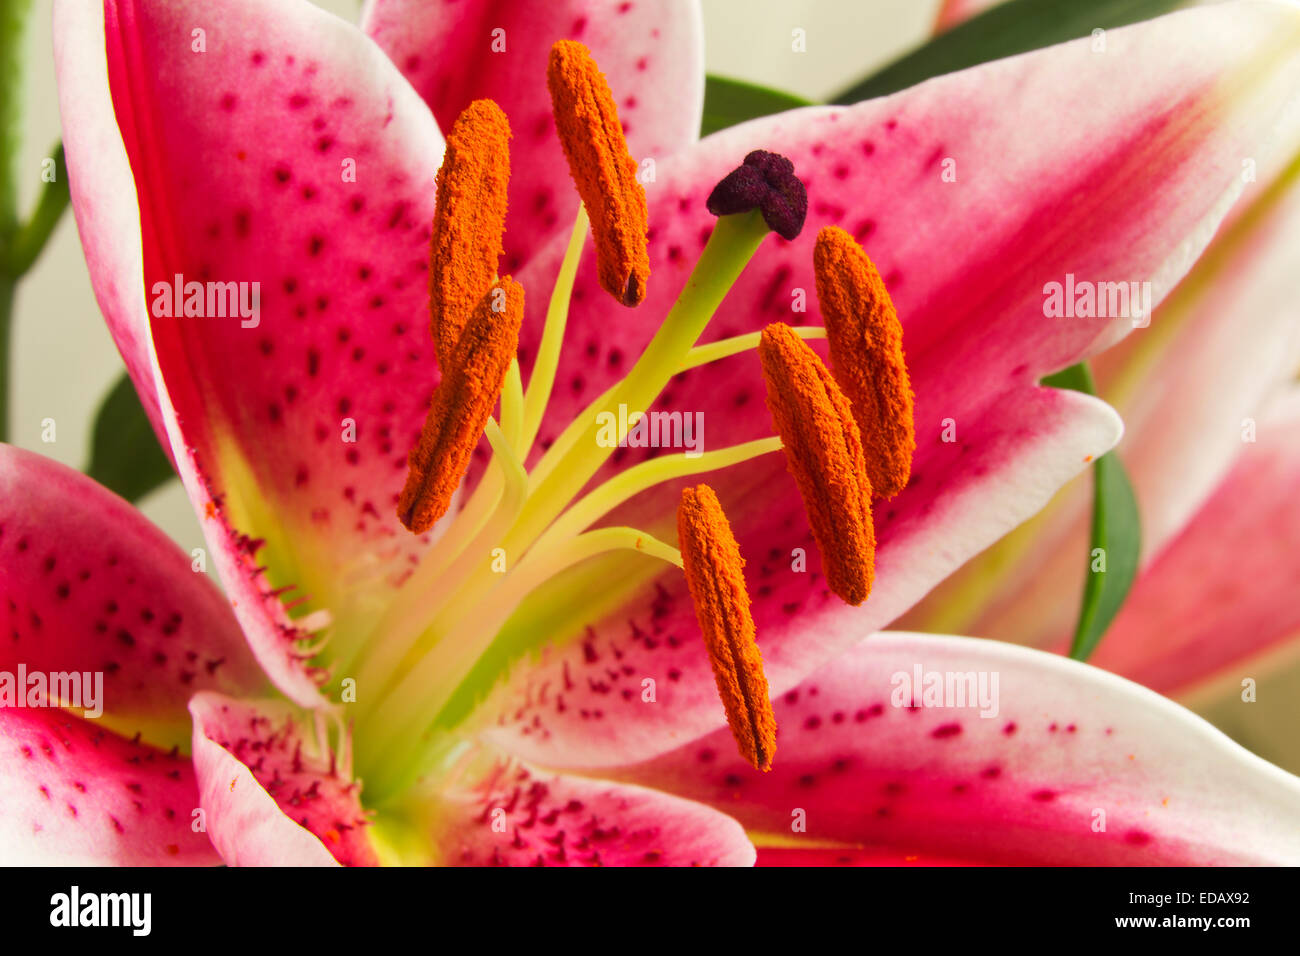 Stargazer Lily close-up with Stamens full of pollen Stock Photo